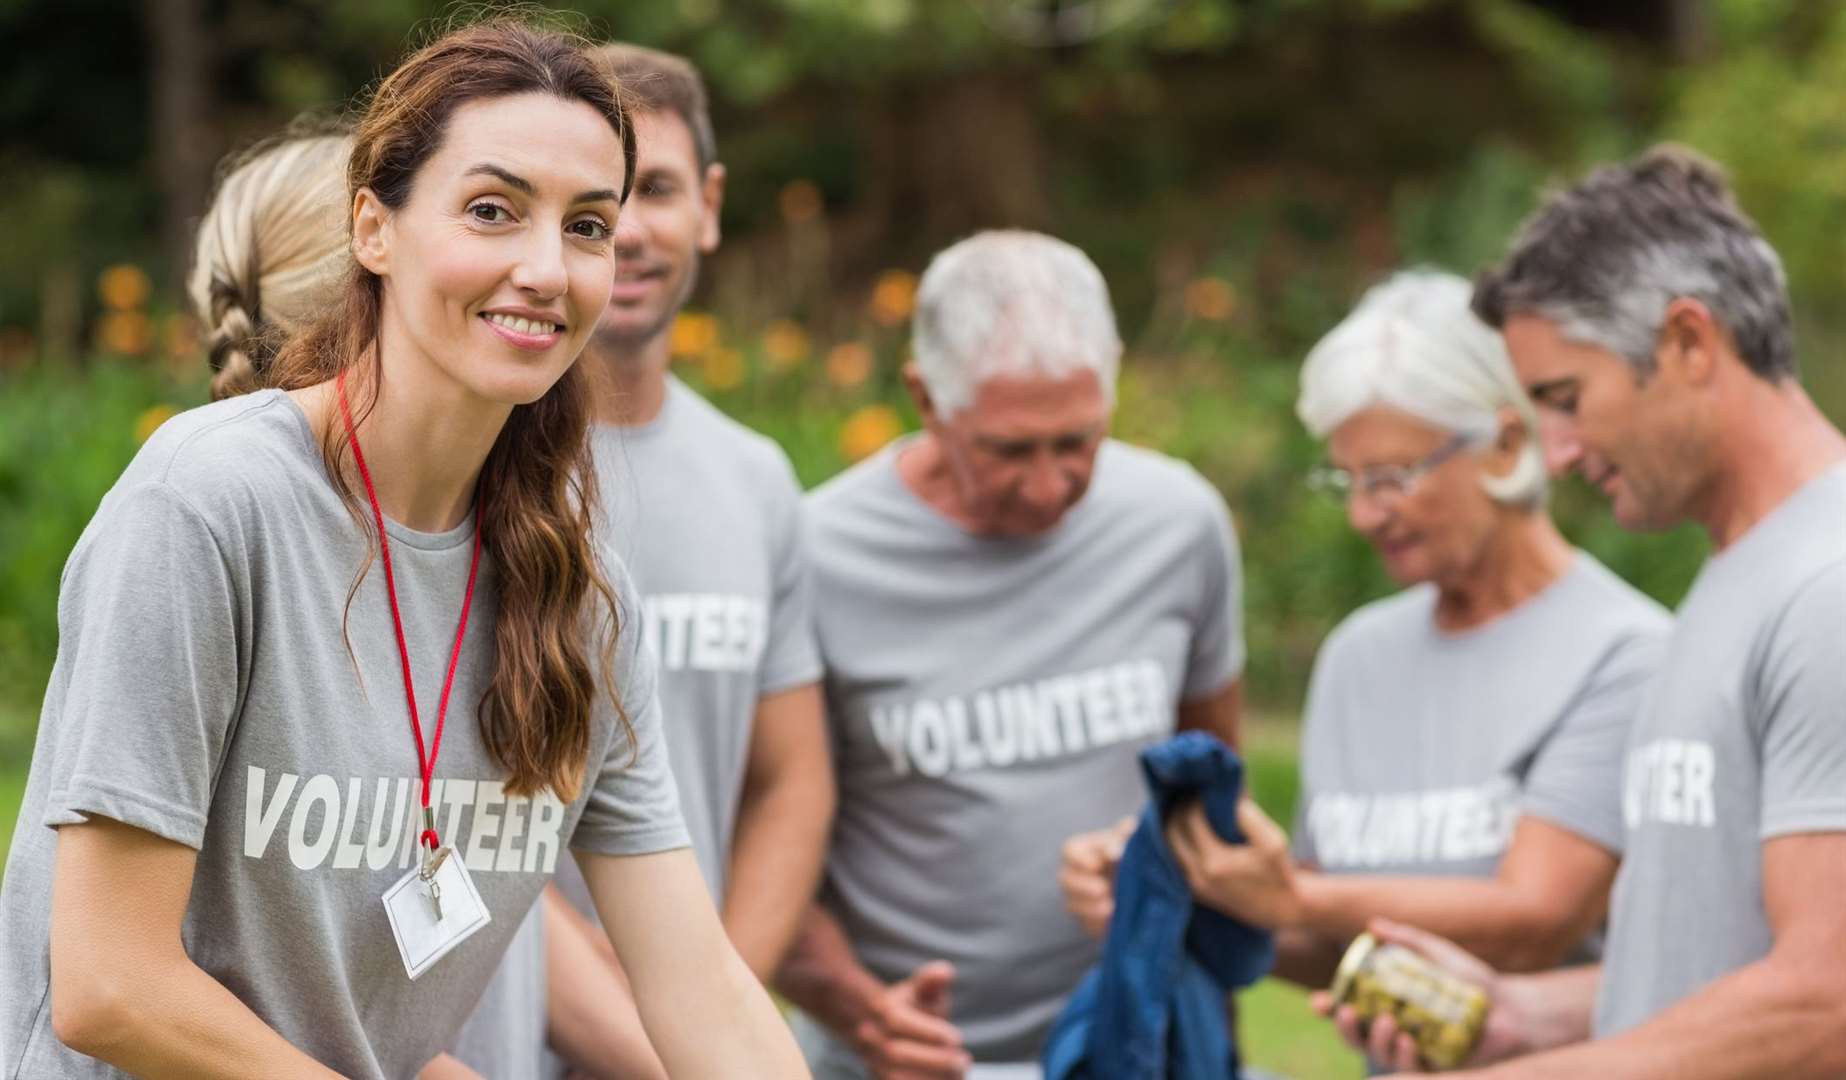 Volunteering can help you gain confidence by giving you the chance to try something new and build a real sense of achievement.